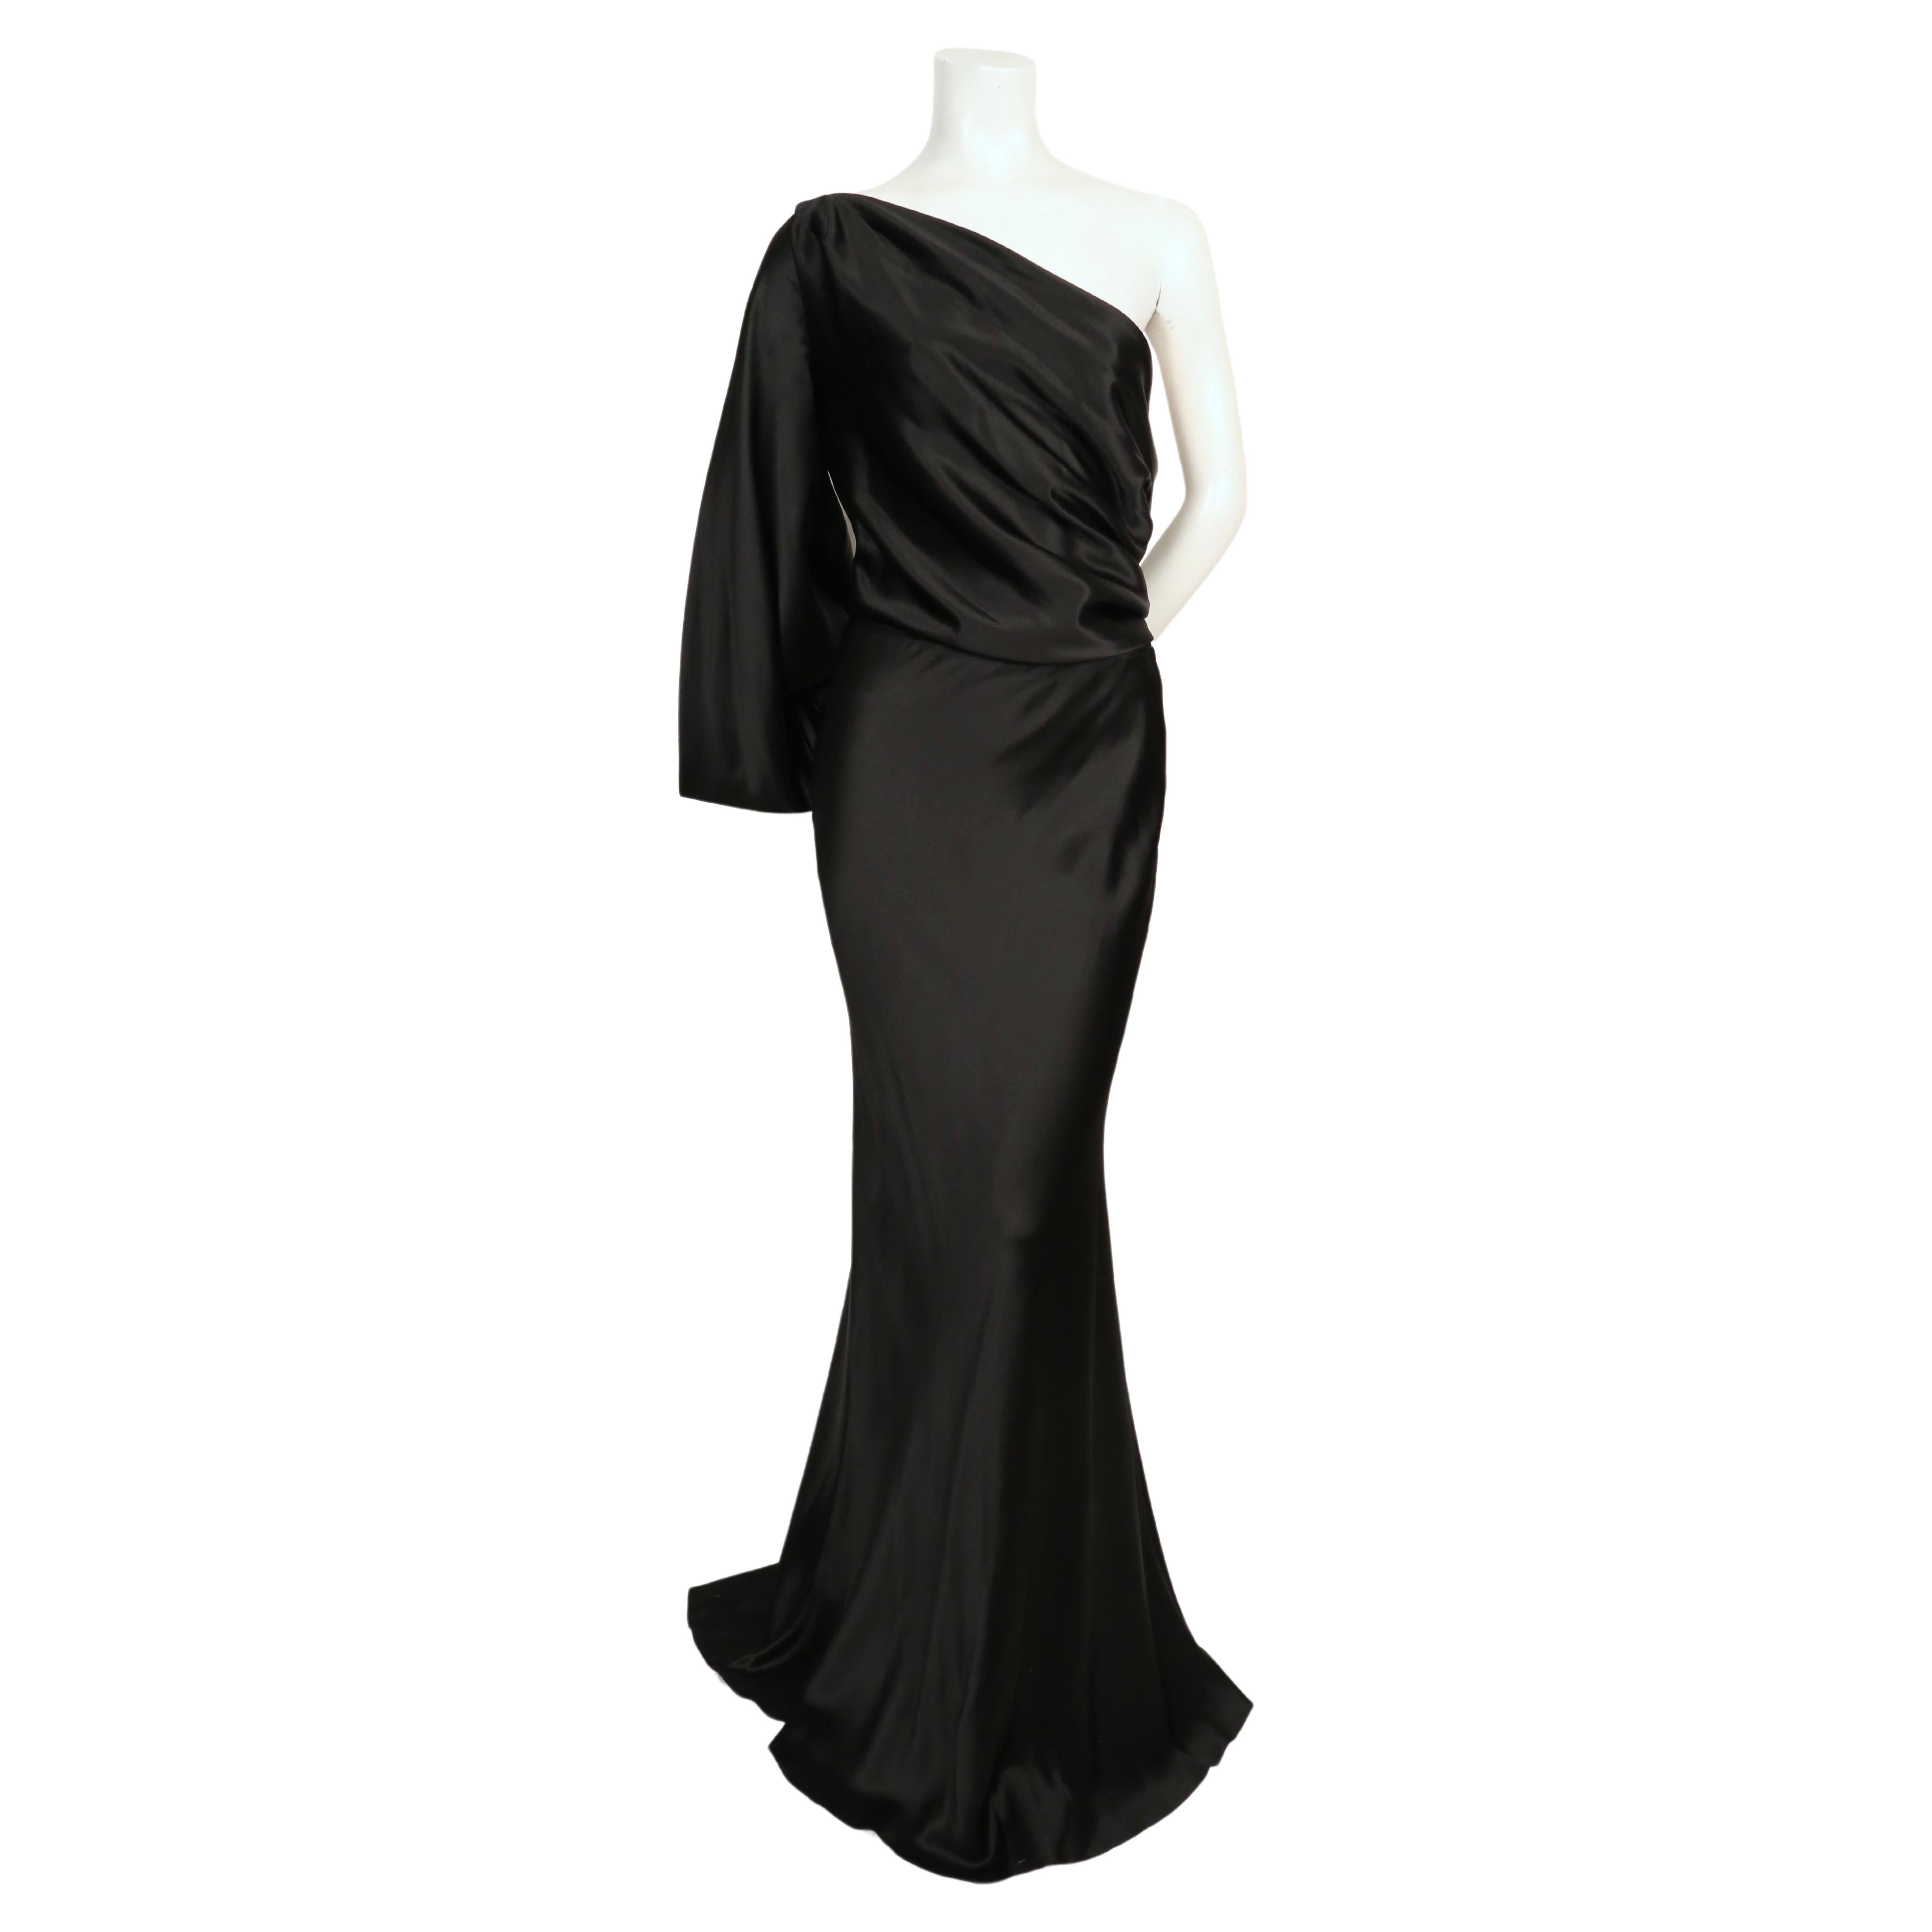 Jet-black, bias-cut jersey gown with asymmetrical one sleeve designed by Alexander McQueen dating to fall 2008. Dress has beautifully draped arm with small covered button closure at wrist. Dress is labeled an Italian size 40, however it best fits a